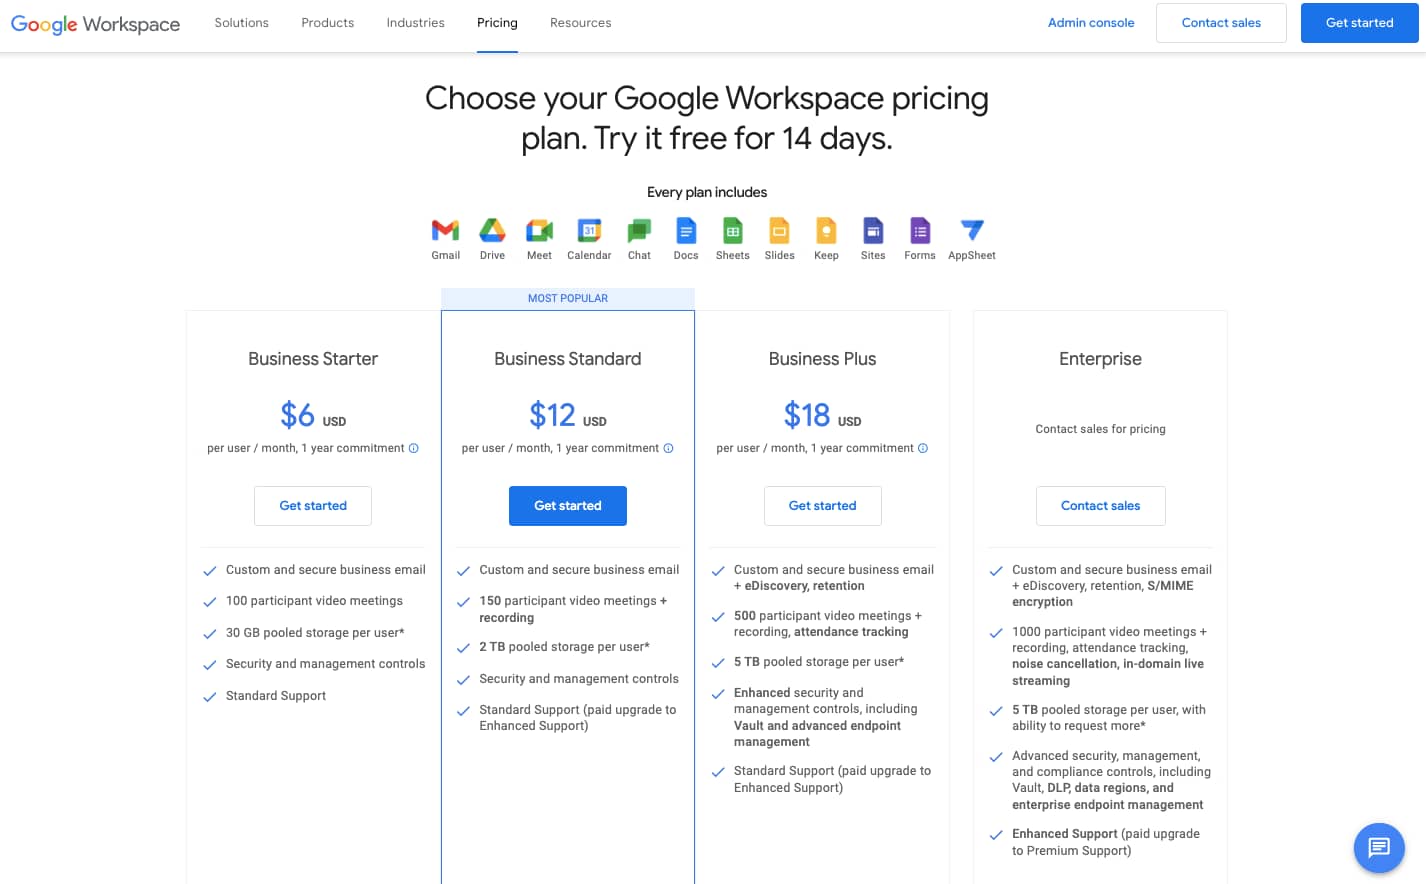 Google Workspace pricing plans range from $6 to $18 — there’s also an enterprise option.